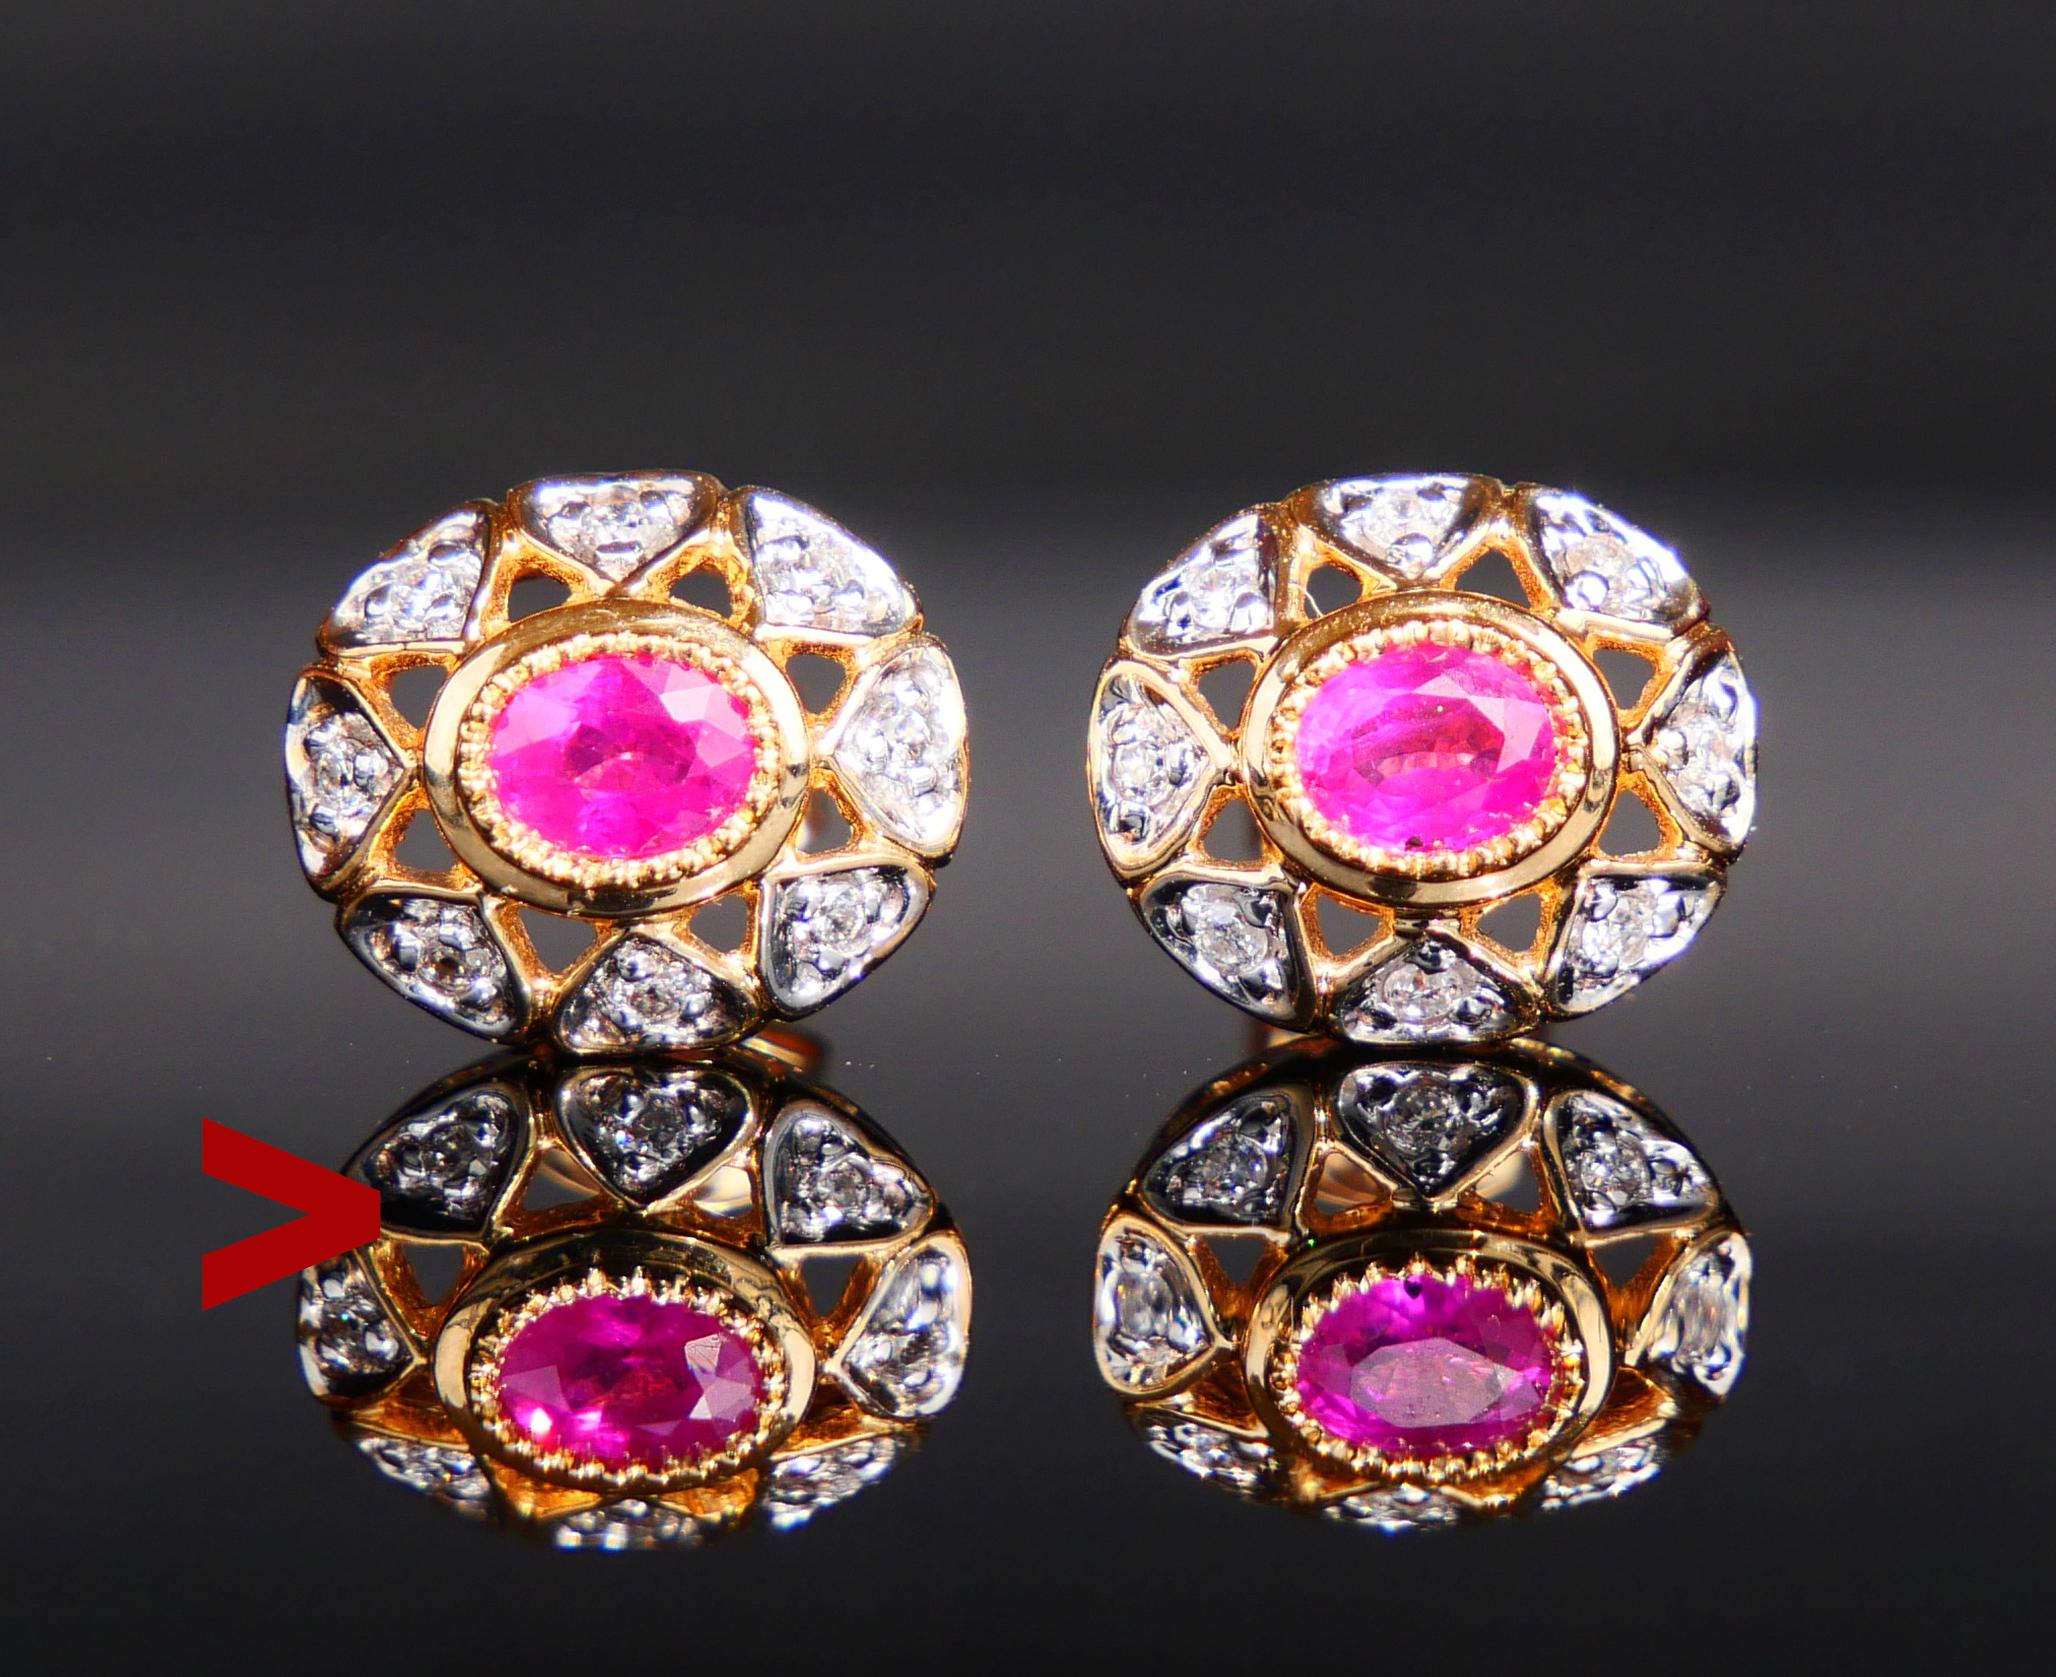 A pair of fine openwork flower halo studs in solid 18K Yellow and White Gold.

European, made ca. 1960s -1970s.

Two bezel set oval cut natural rosy Red Rubies 4 x 3 mm / ca. 03 ct each, both demonstrate flaws and inclusions typical for